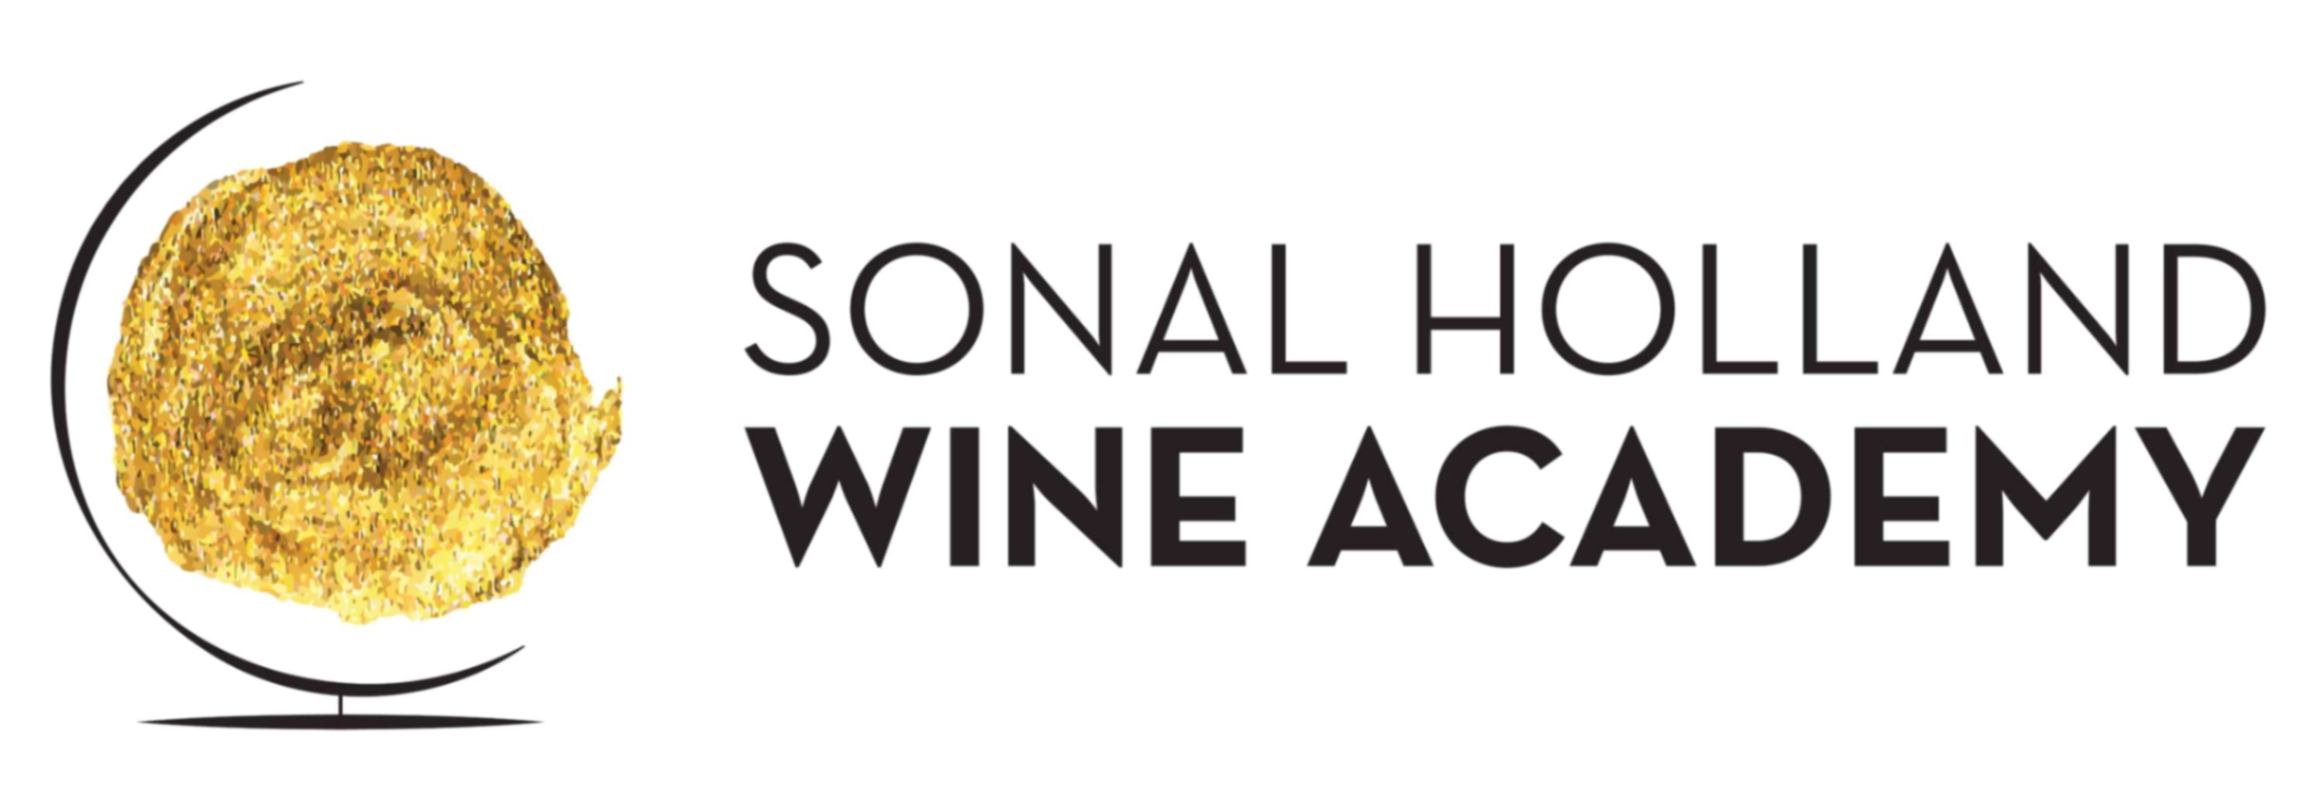 Advance with WSET Level 2 in Wines | Sonal Holland Wine Academy